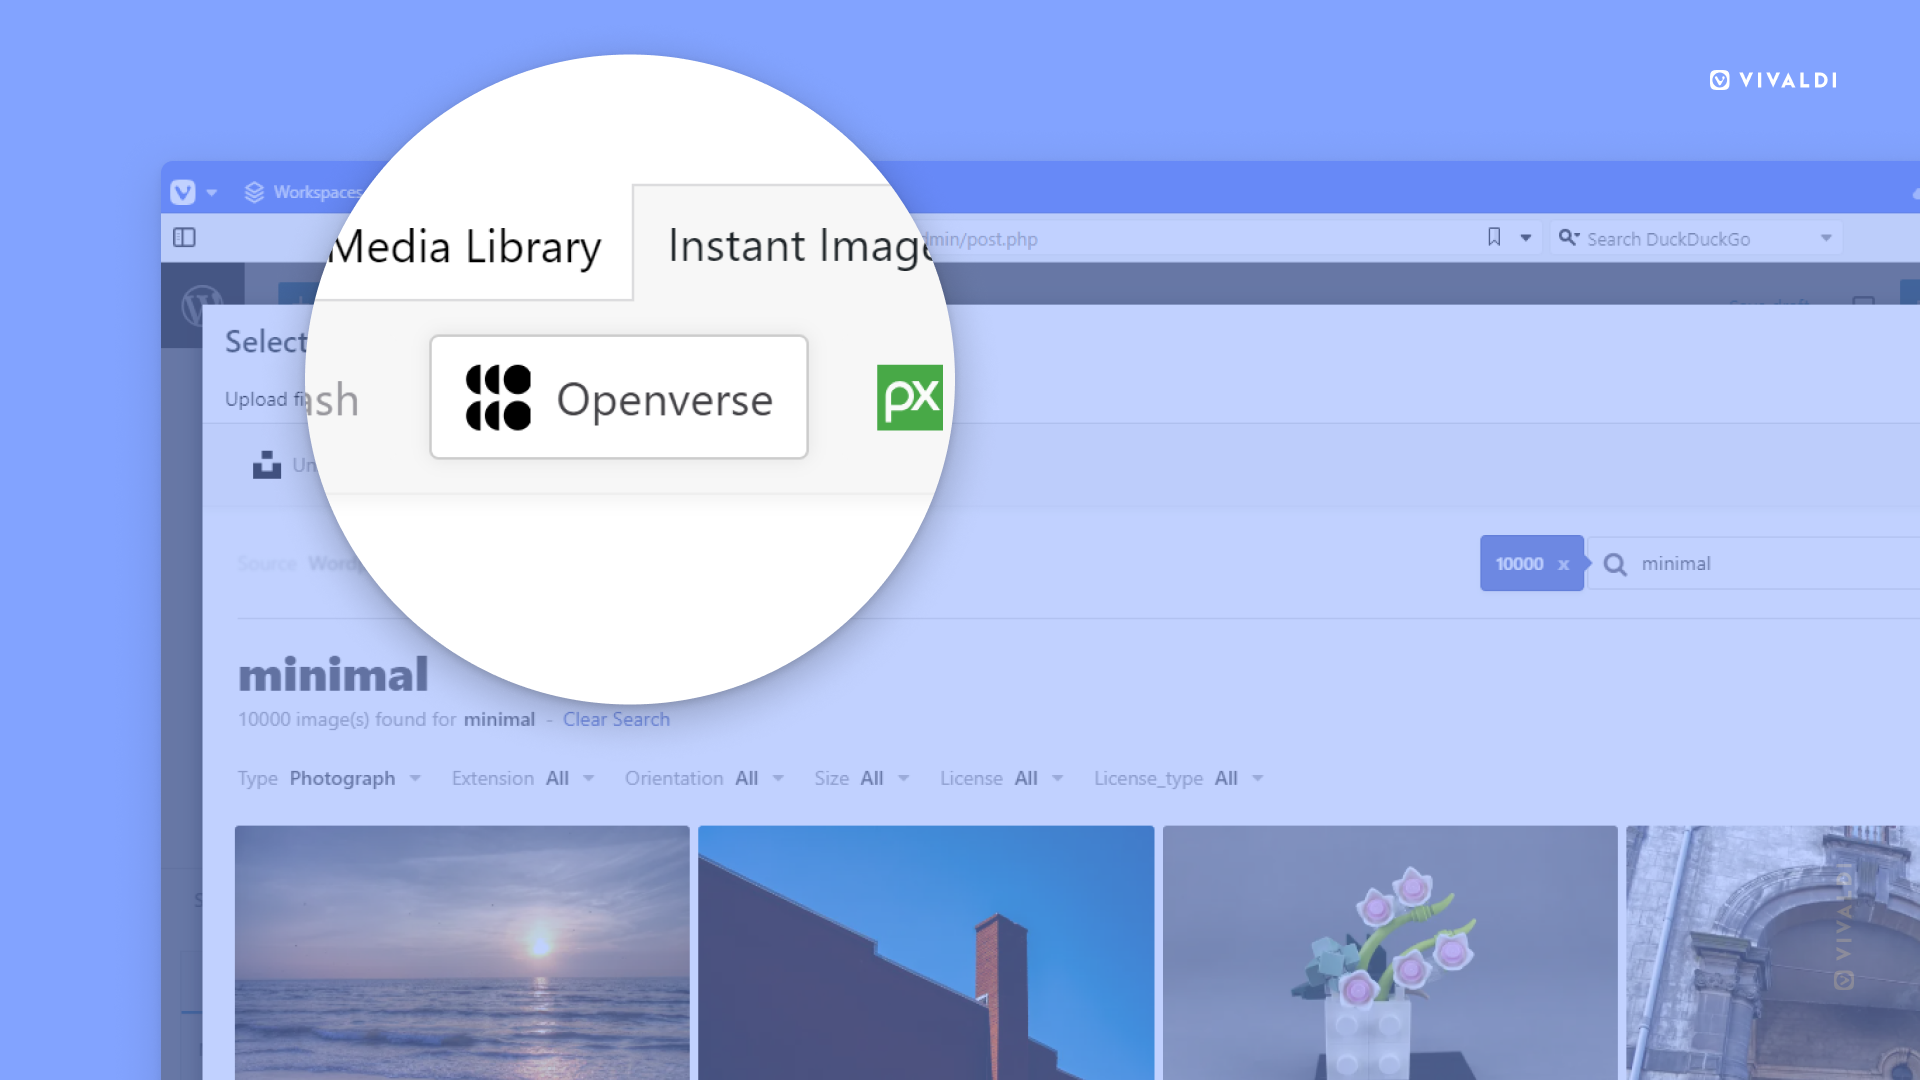 Instant Images tab tab in Media Library open with Openverse highlighted.